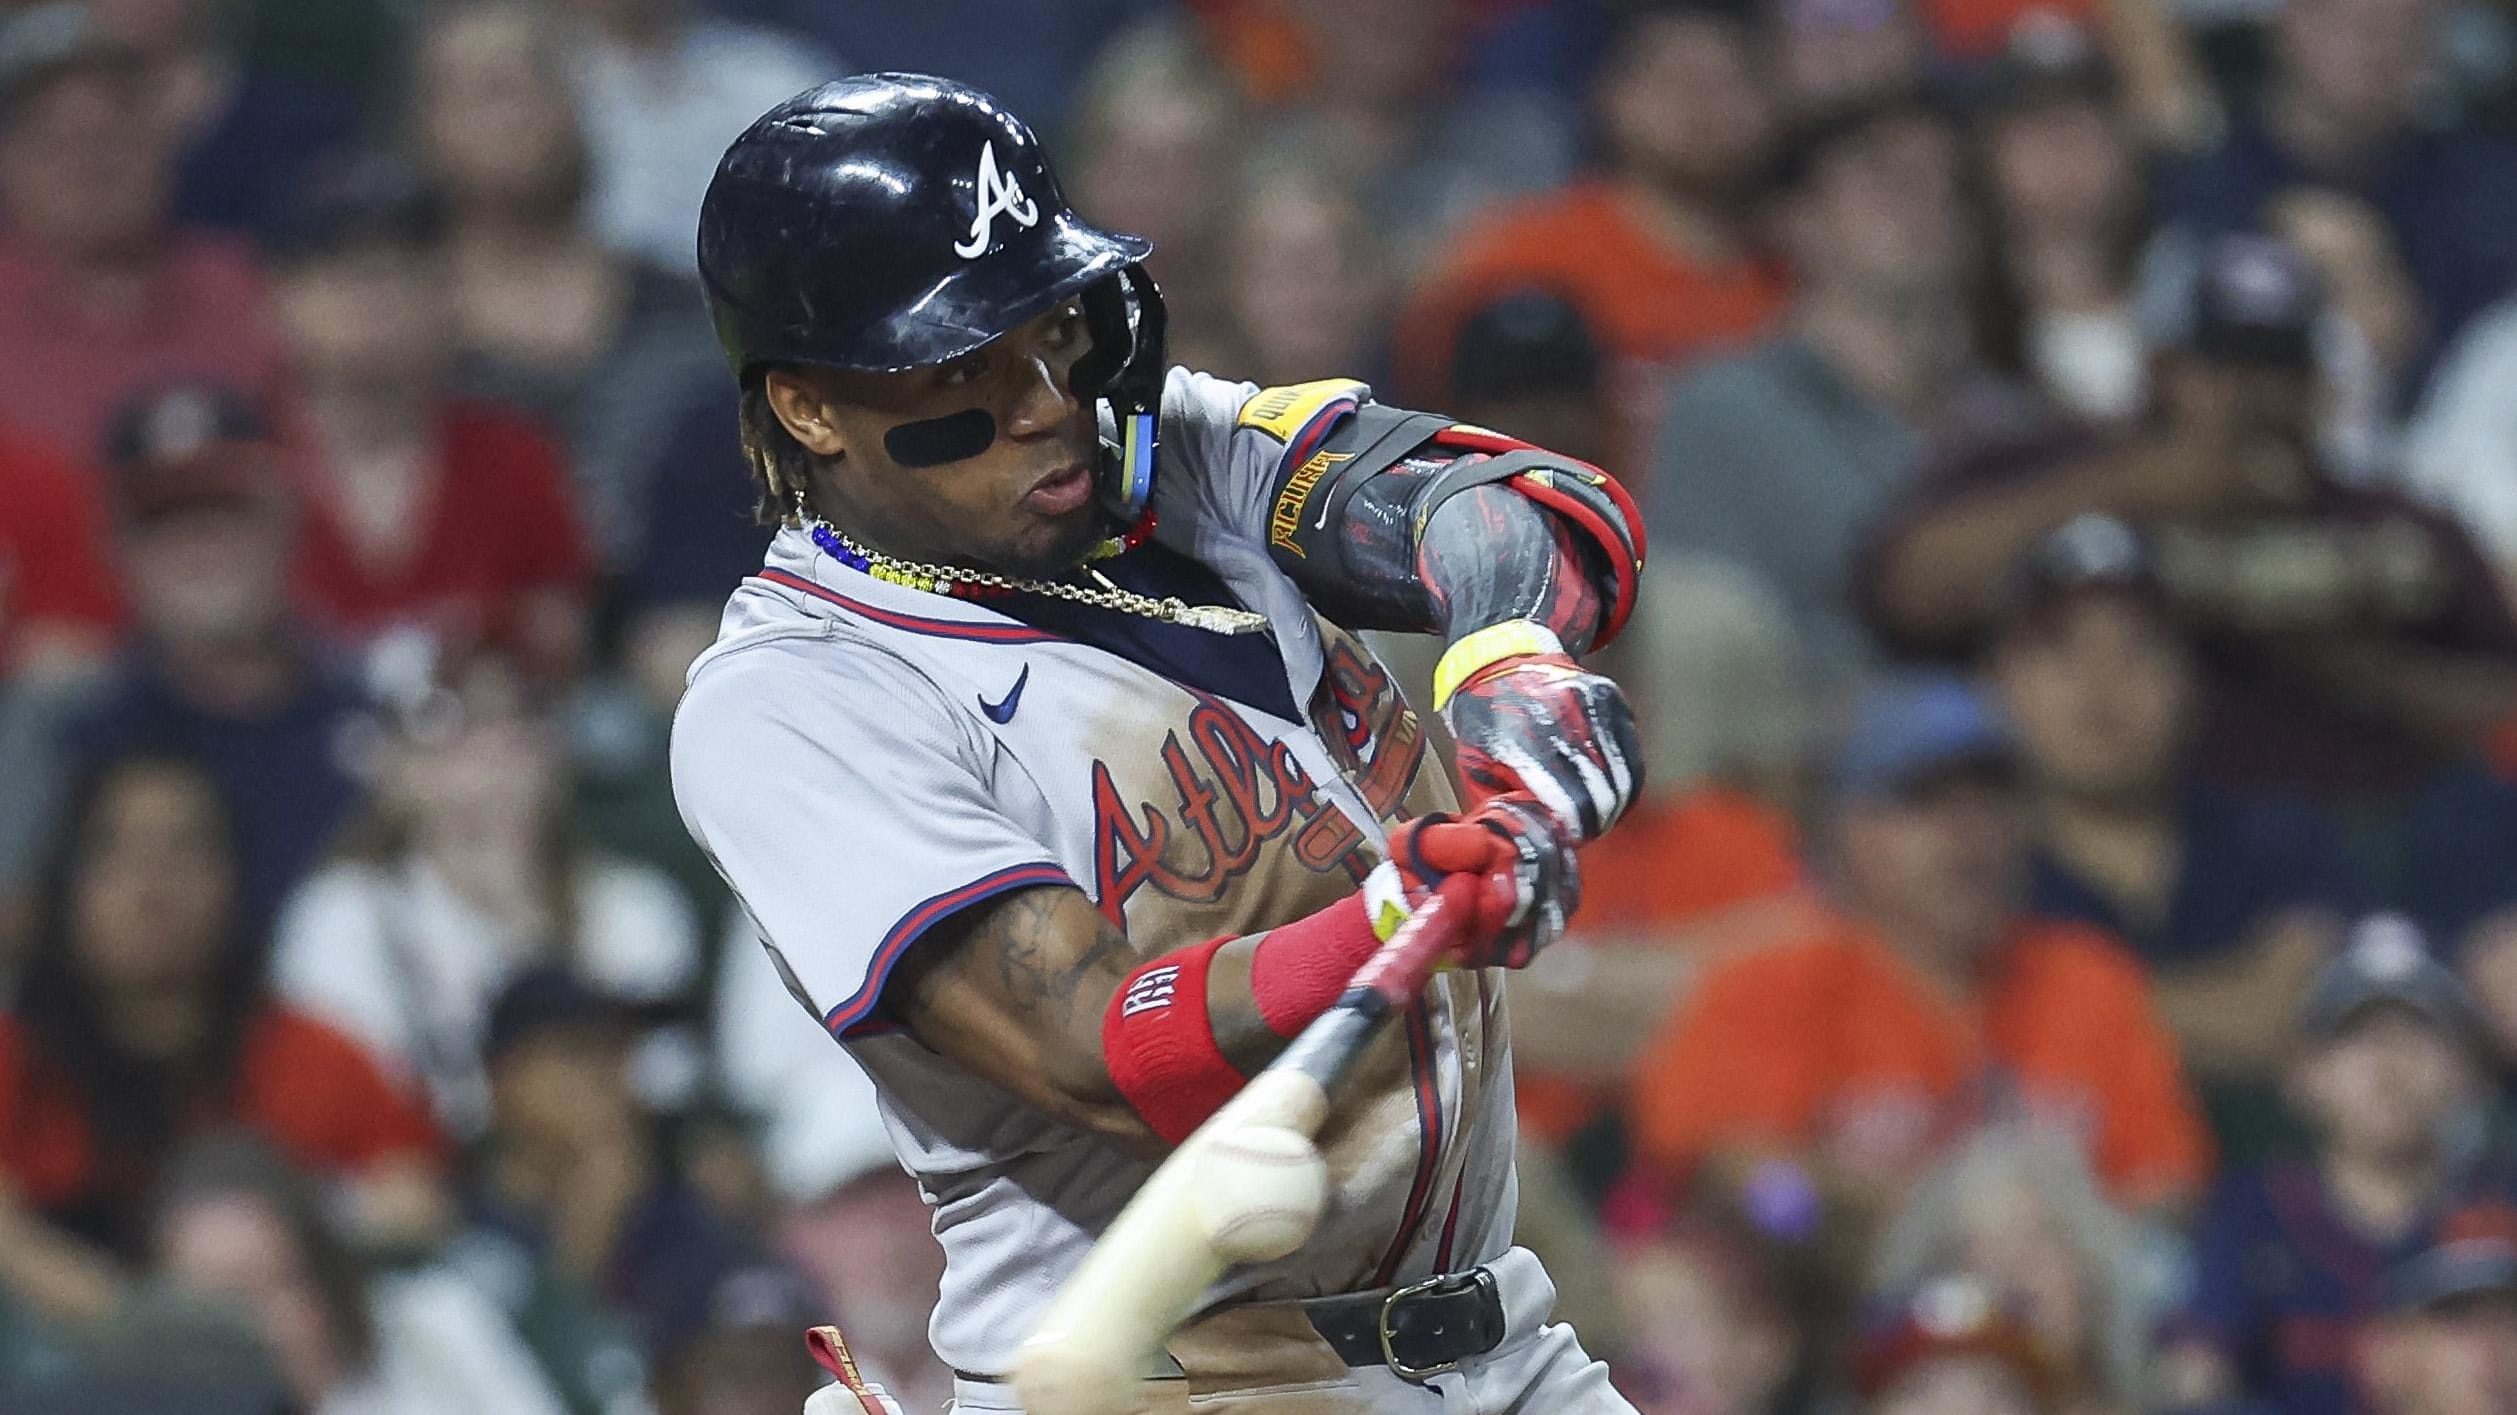 Atlanta Braves right fielder Ronald Acuna Jr. hit his first home run of the season against the Houston Astros this afternoon. 